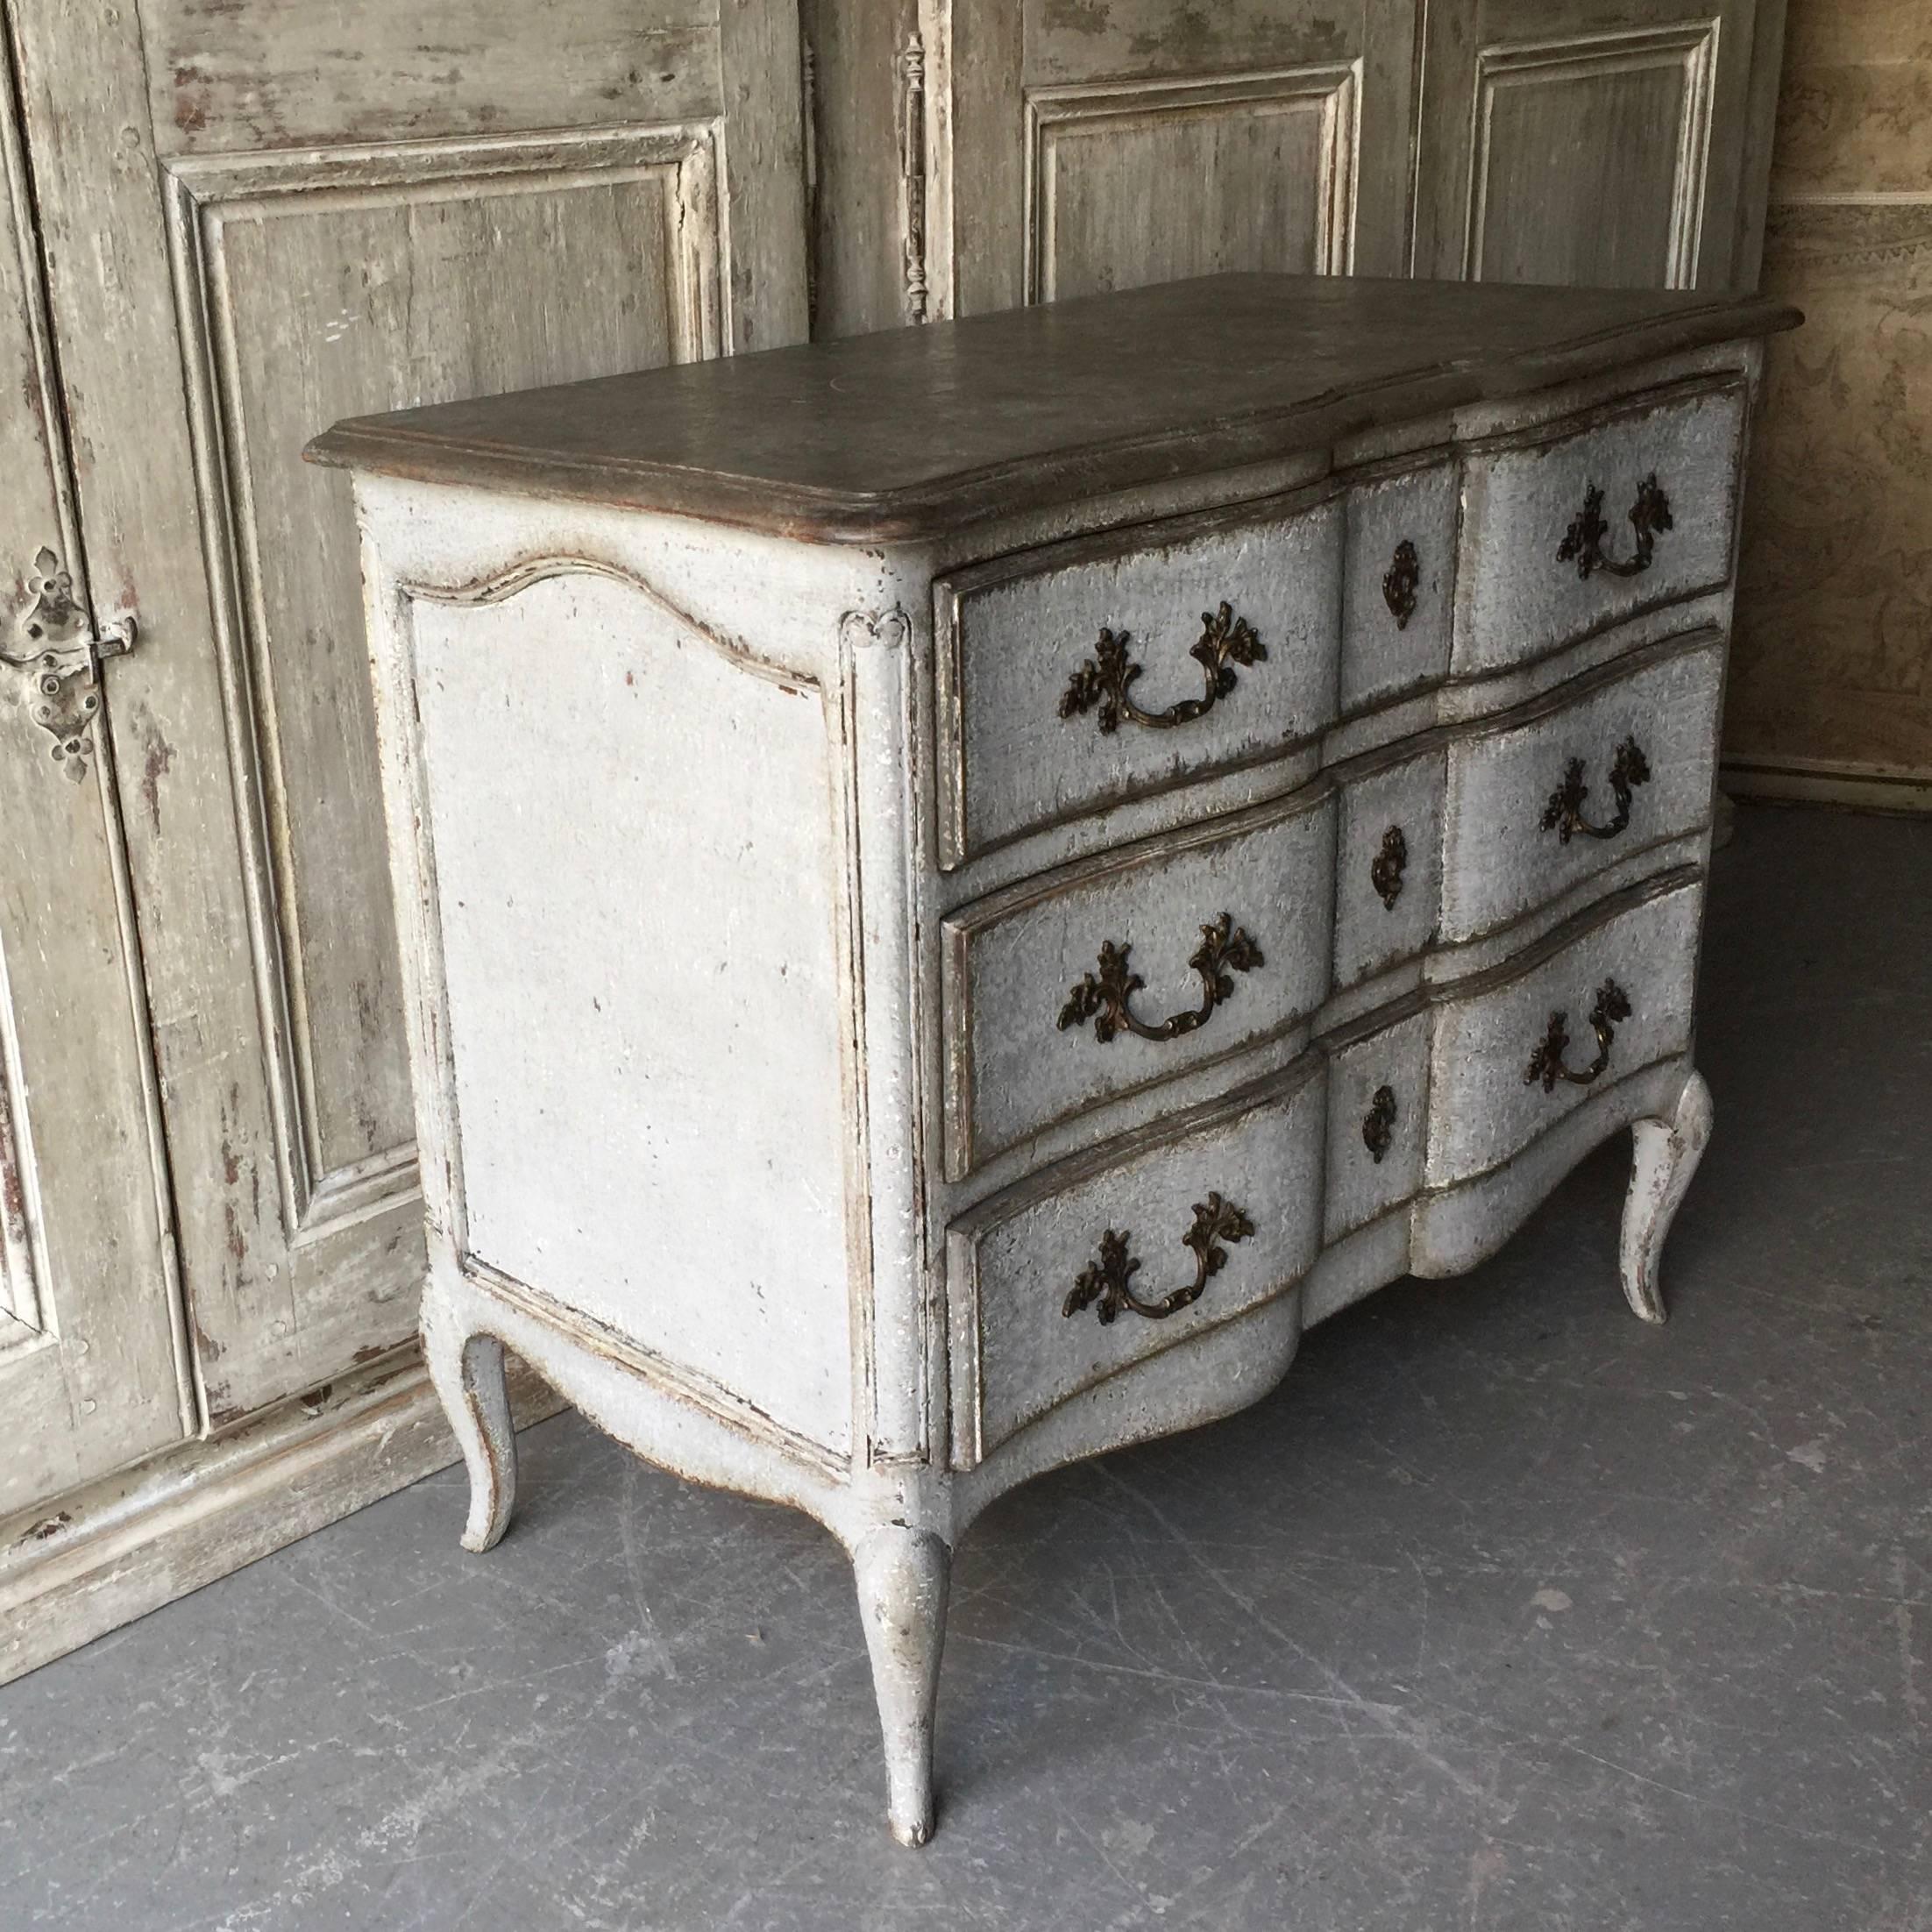 19th century LXV style small, charming commode in worn light blue/gray patina with rounded corners, shaped dark gray top with molded fore-edge and superb decorative bronze keyholes and drop handles on long cabriole legs,
France, circa